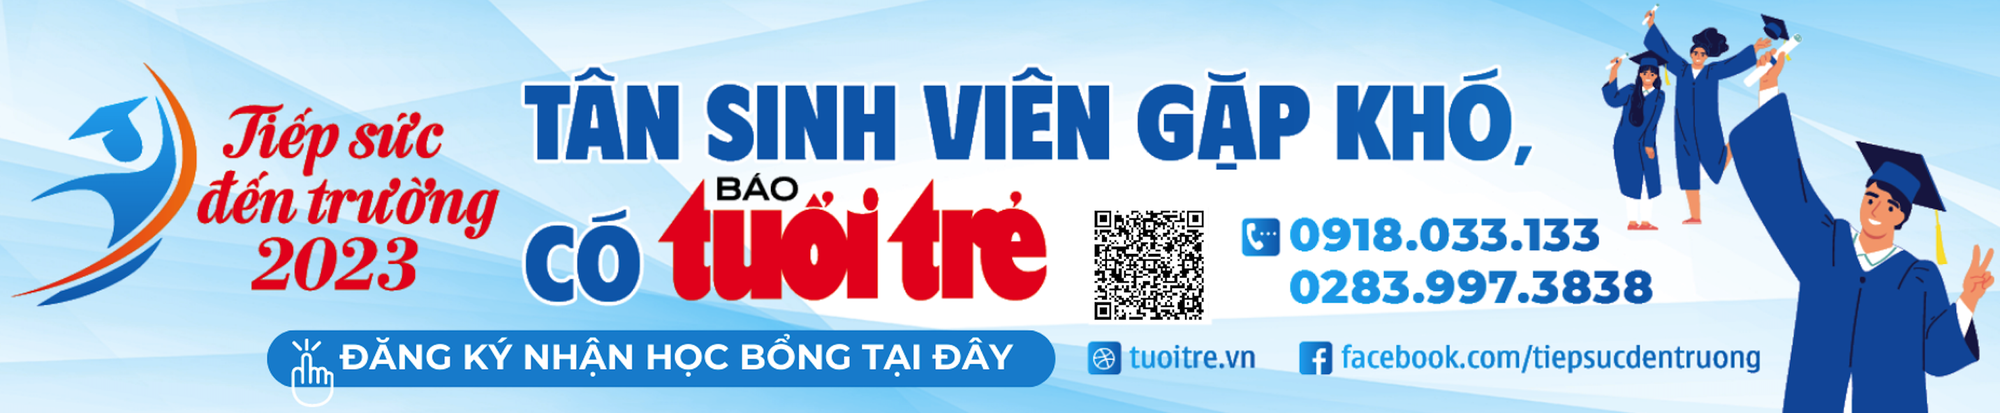 Dai-Ichi Life Vietnam supports difficult new students with 500 million VND – Photo 2.